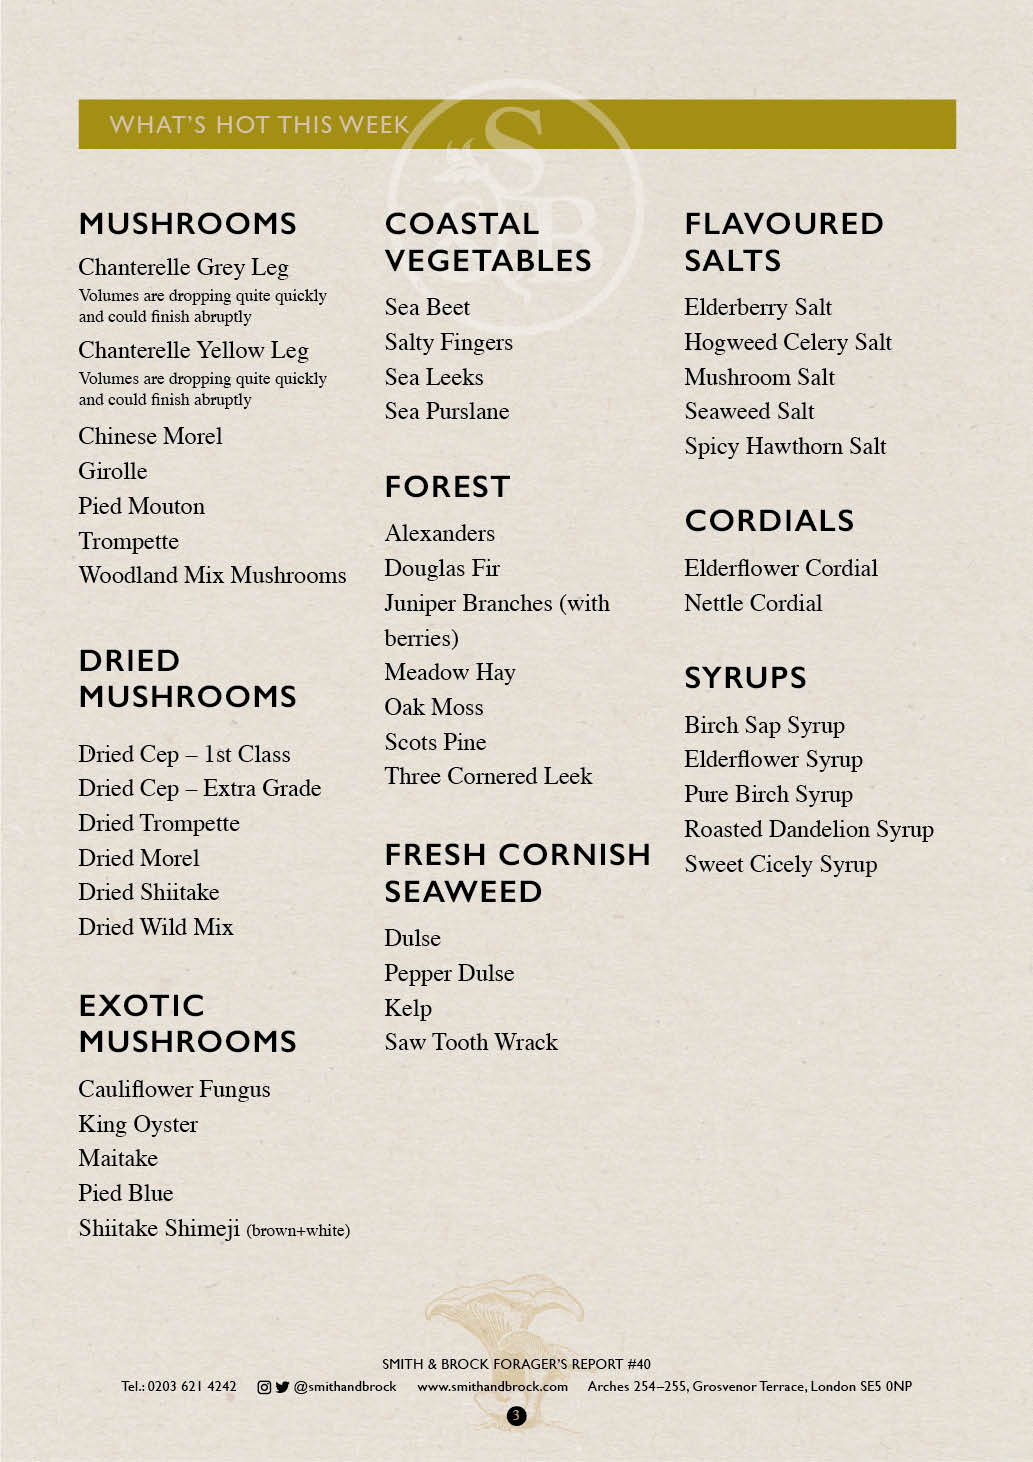 Smith&Brock Foraged Products Report 27 Jan 2020 403